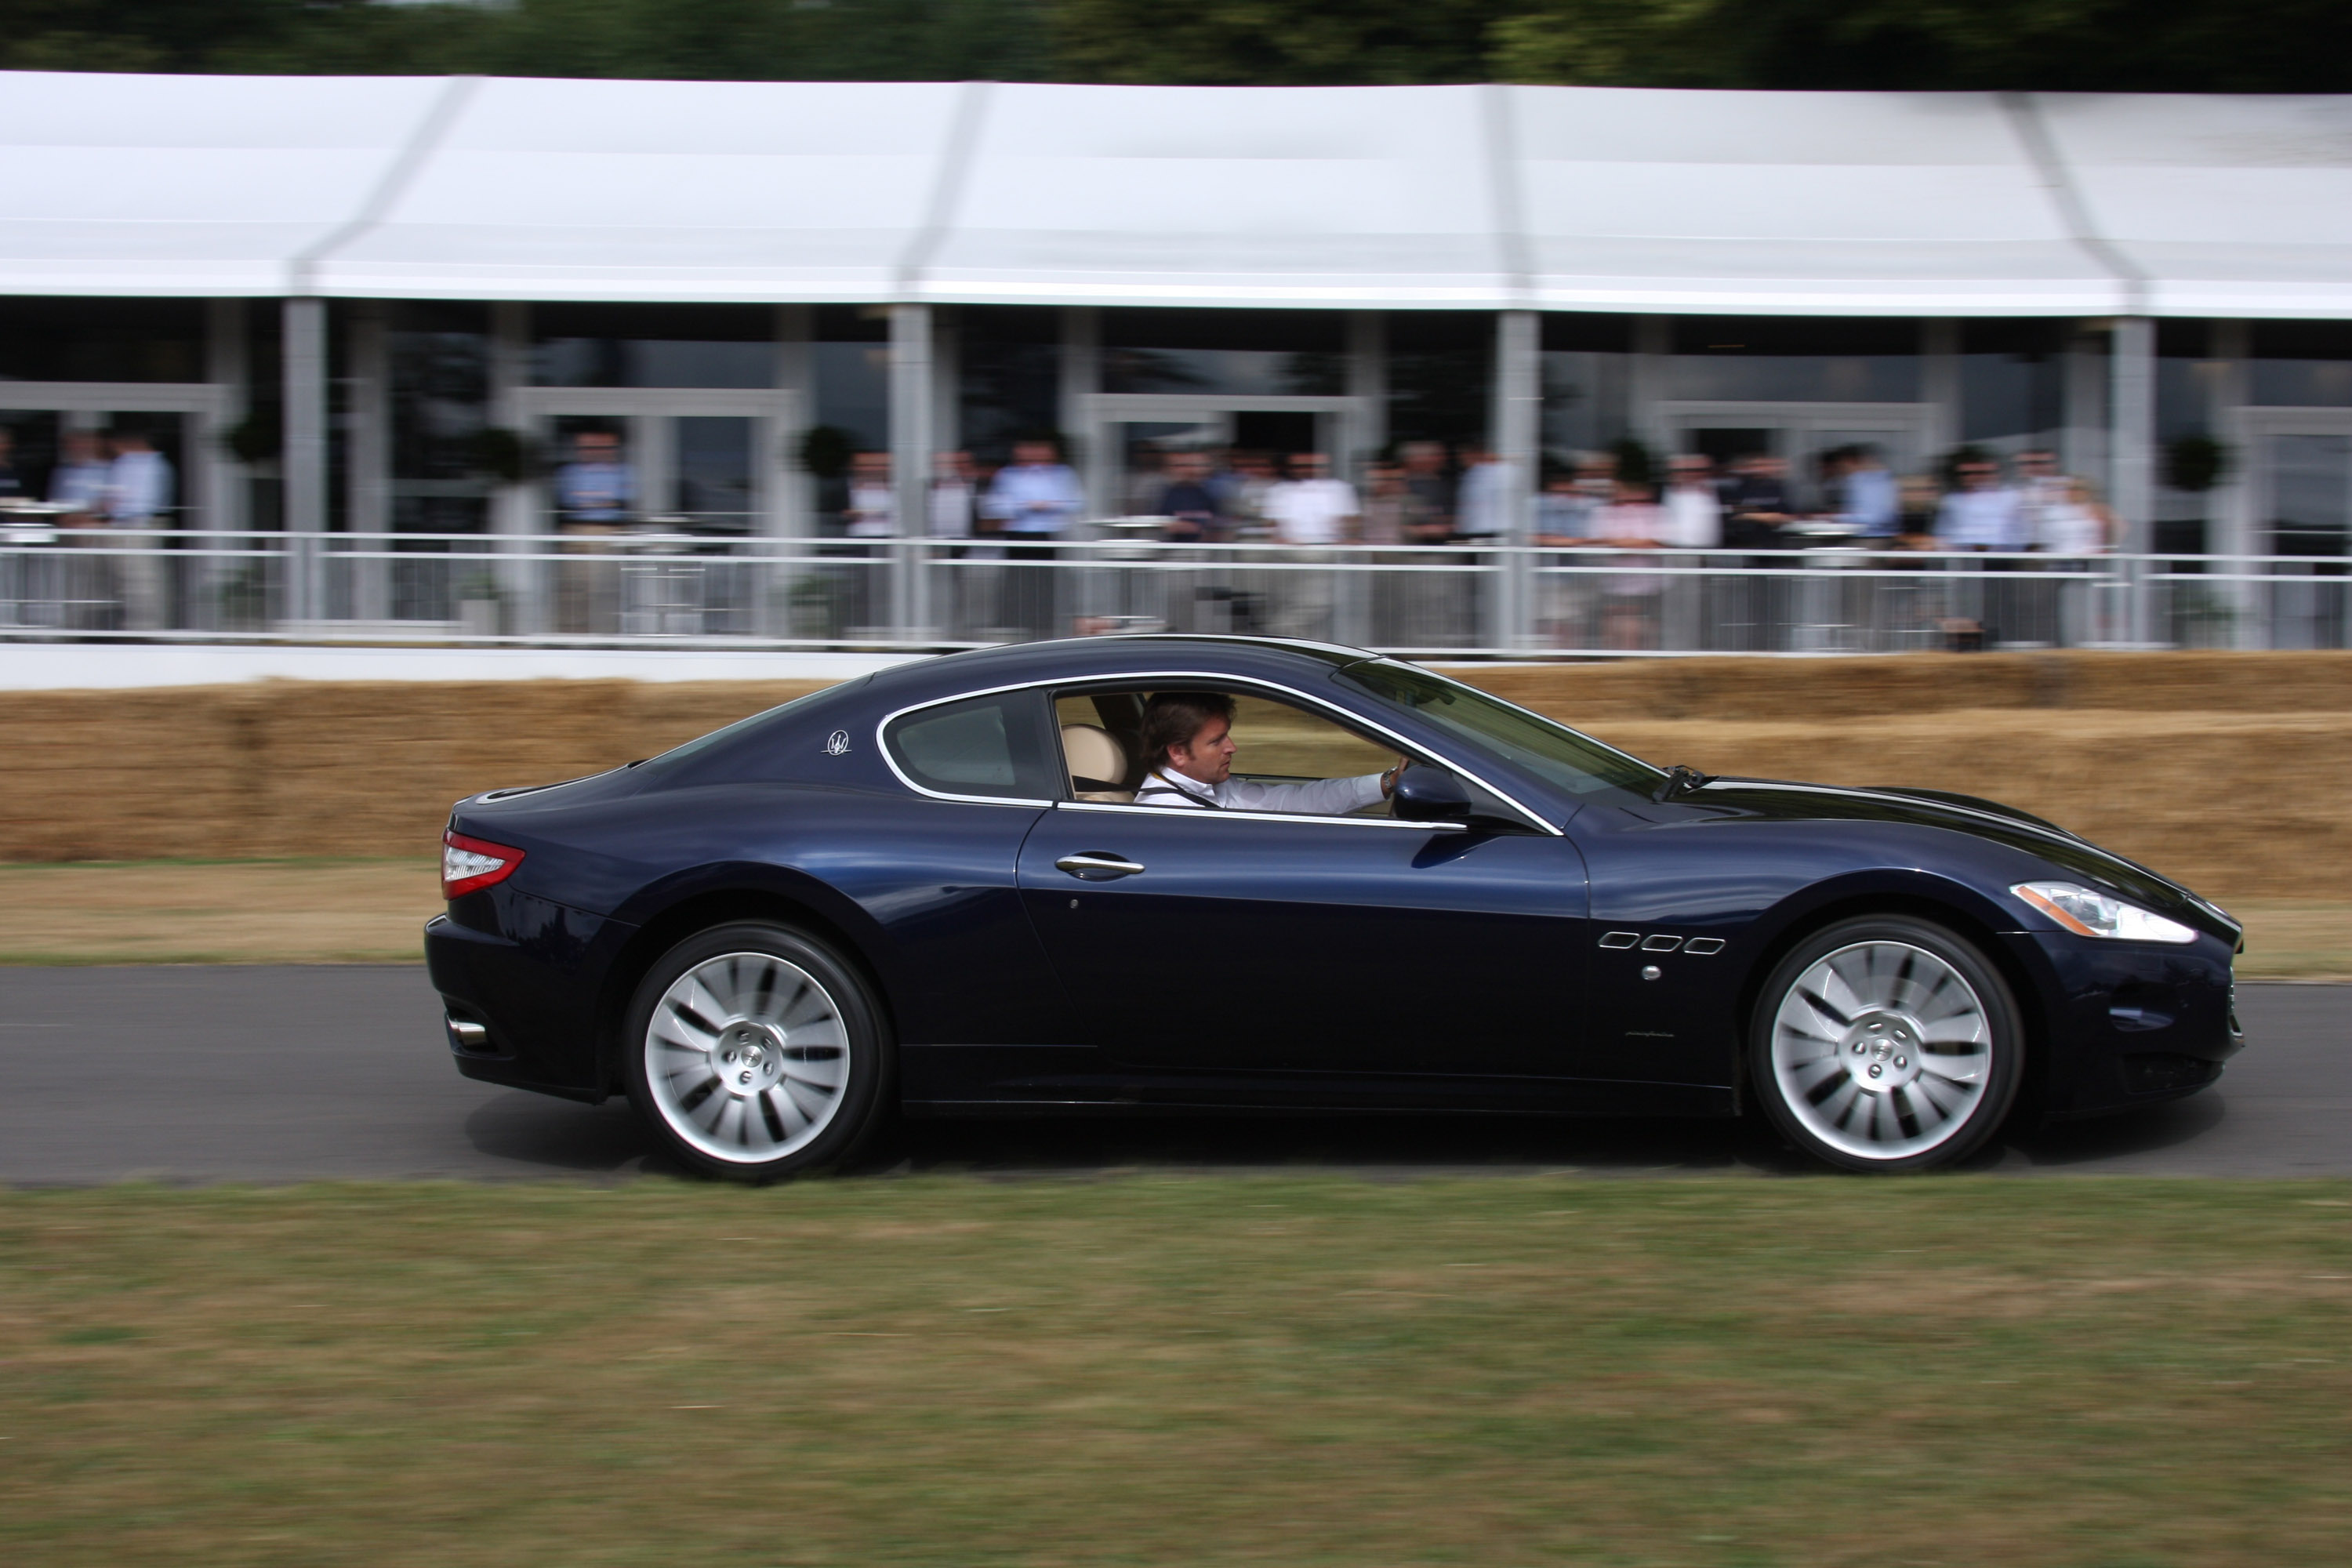 Maserati at the Goodwood Festival of Speed